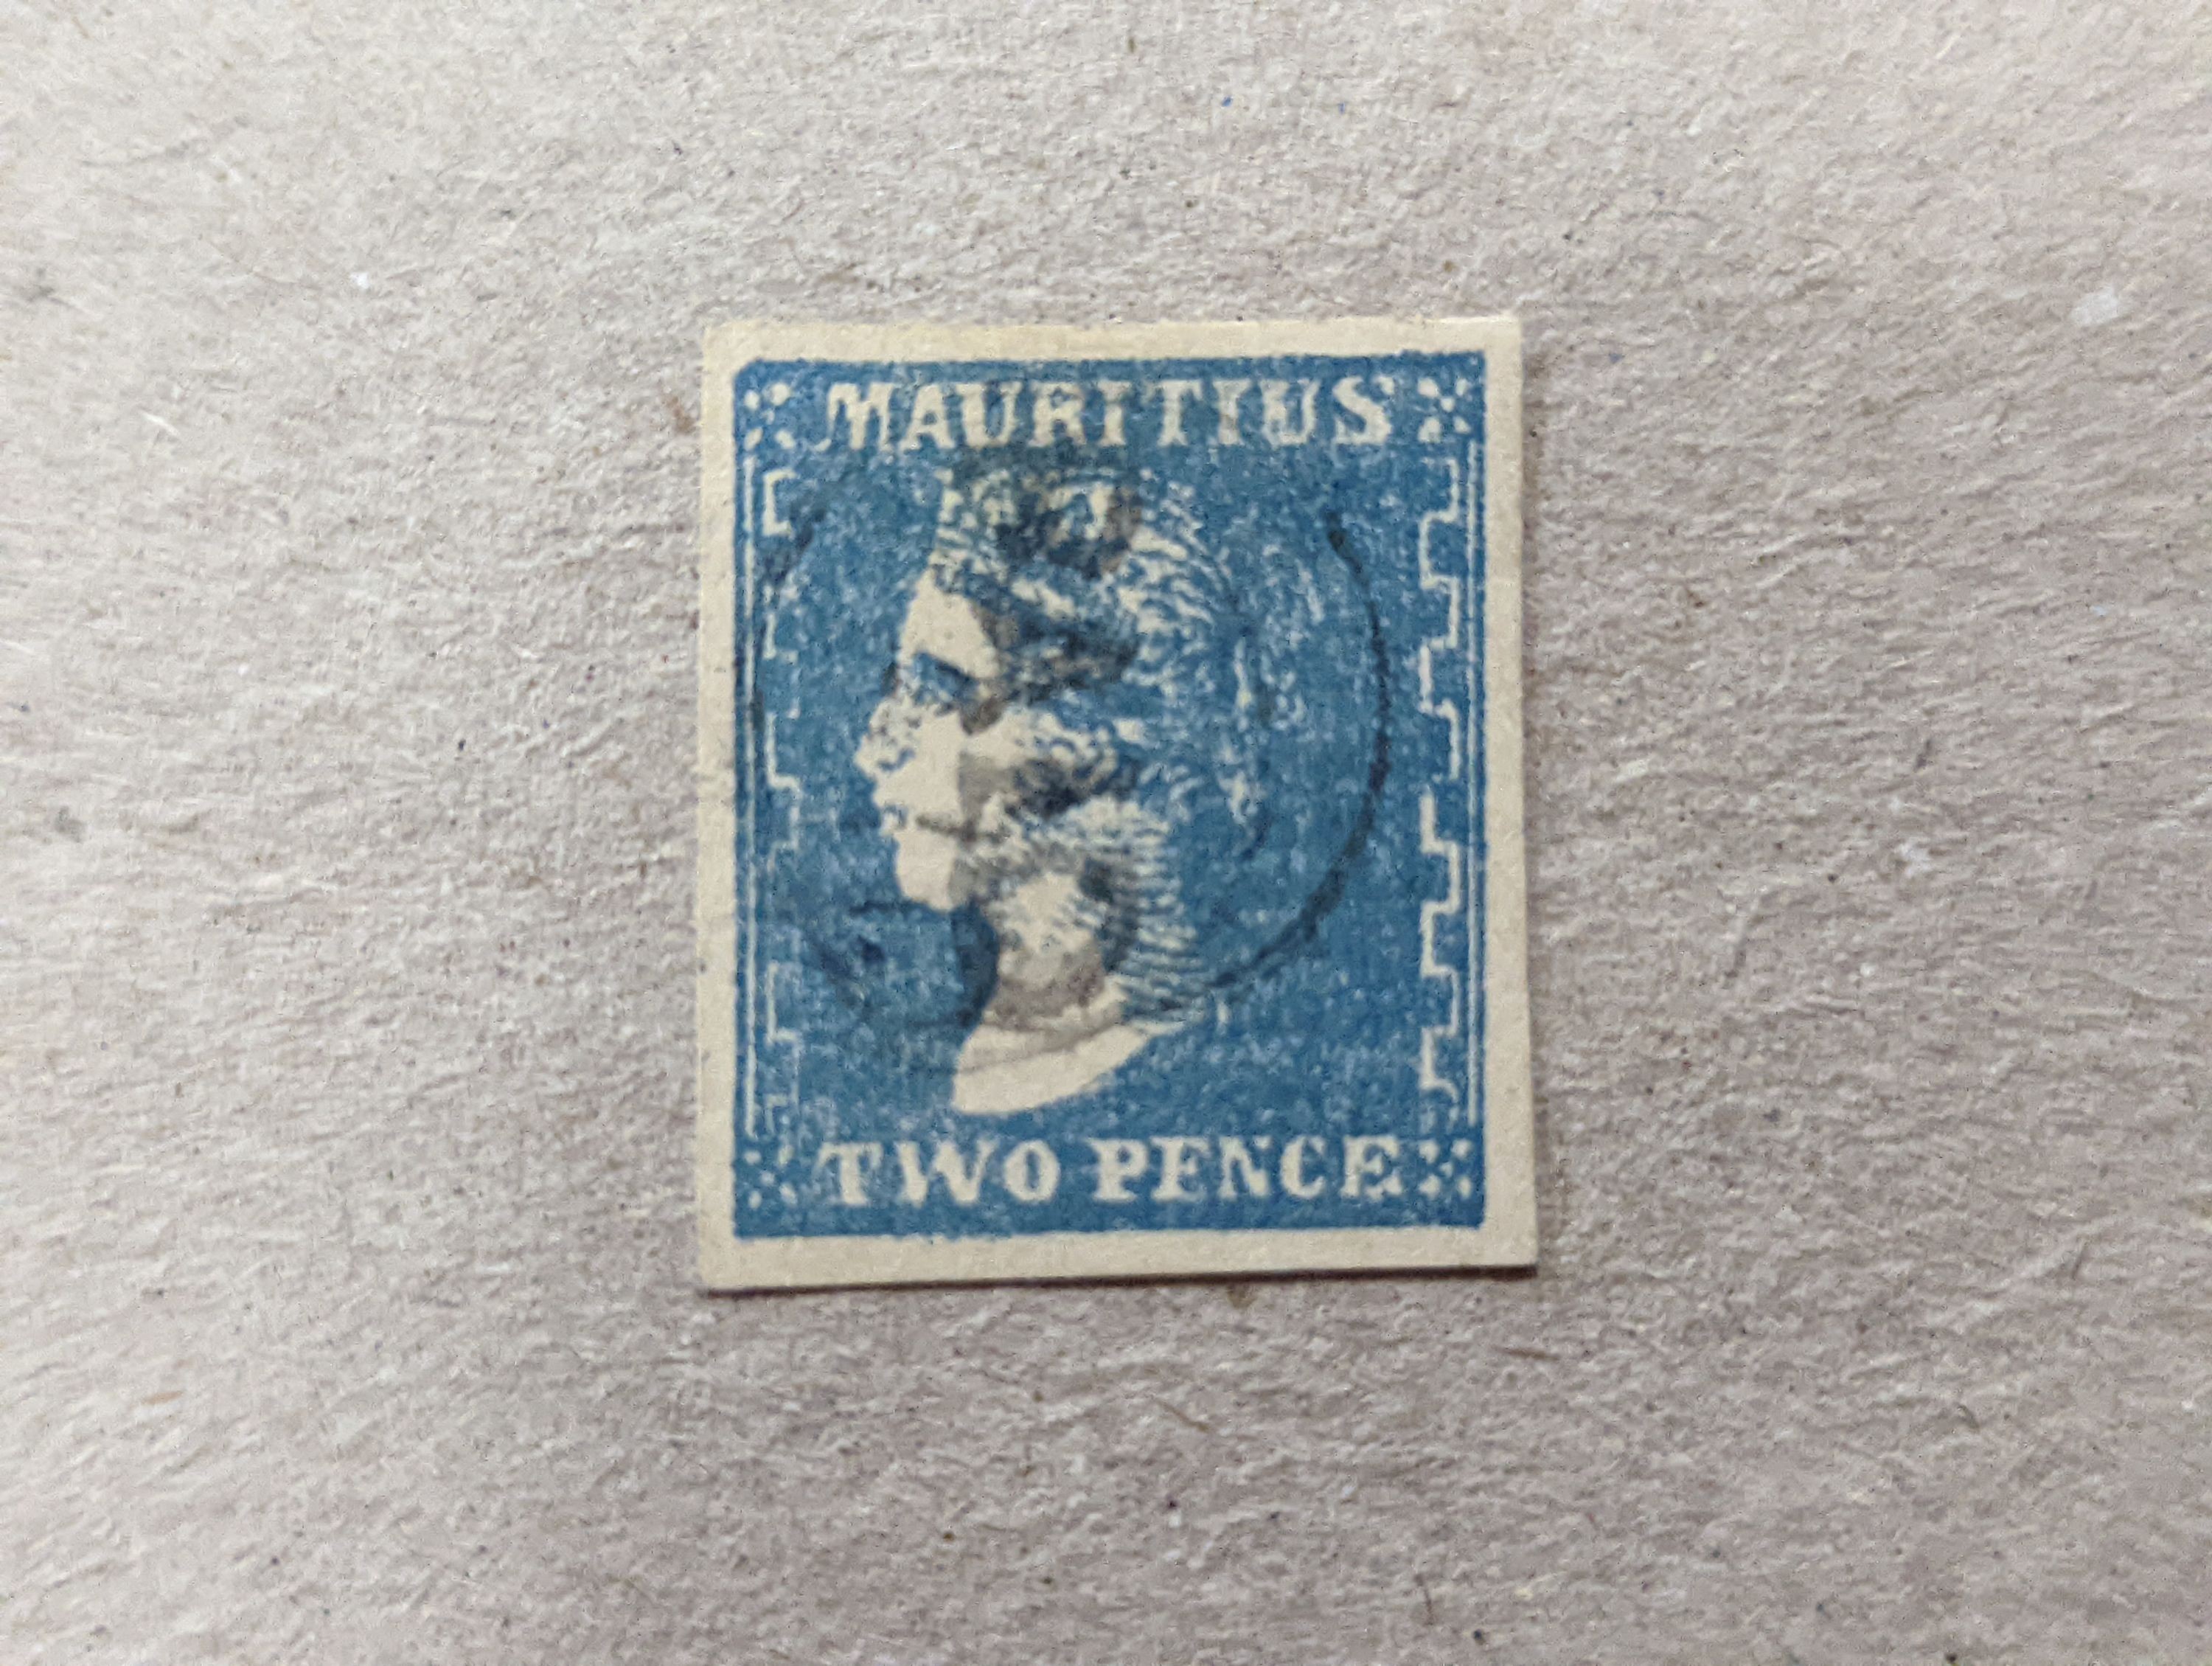 Mauritius - 5 early imperf. stamps with 1848-59 1d red post paid (sg 23), 1858 4d green, 1859 2d blue 'Lapirot' (sg 38), 1859 'Dardenne' 1d red and 2d blue, all four margins used